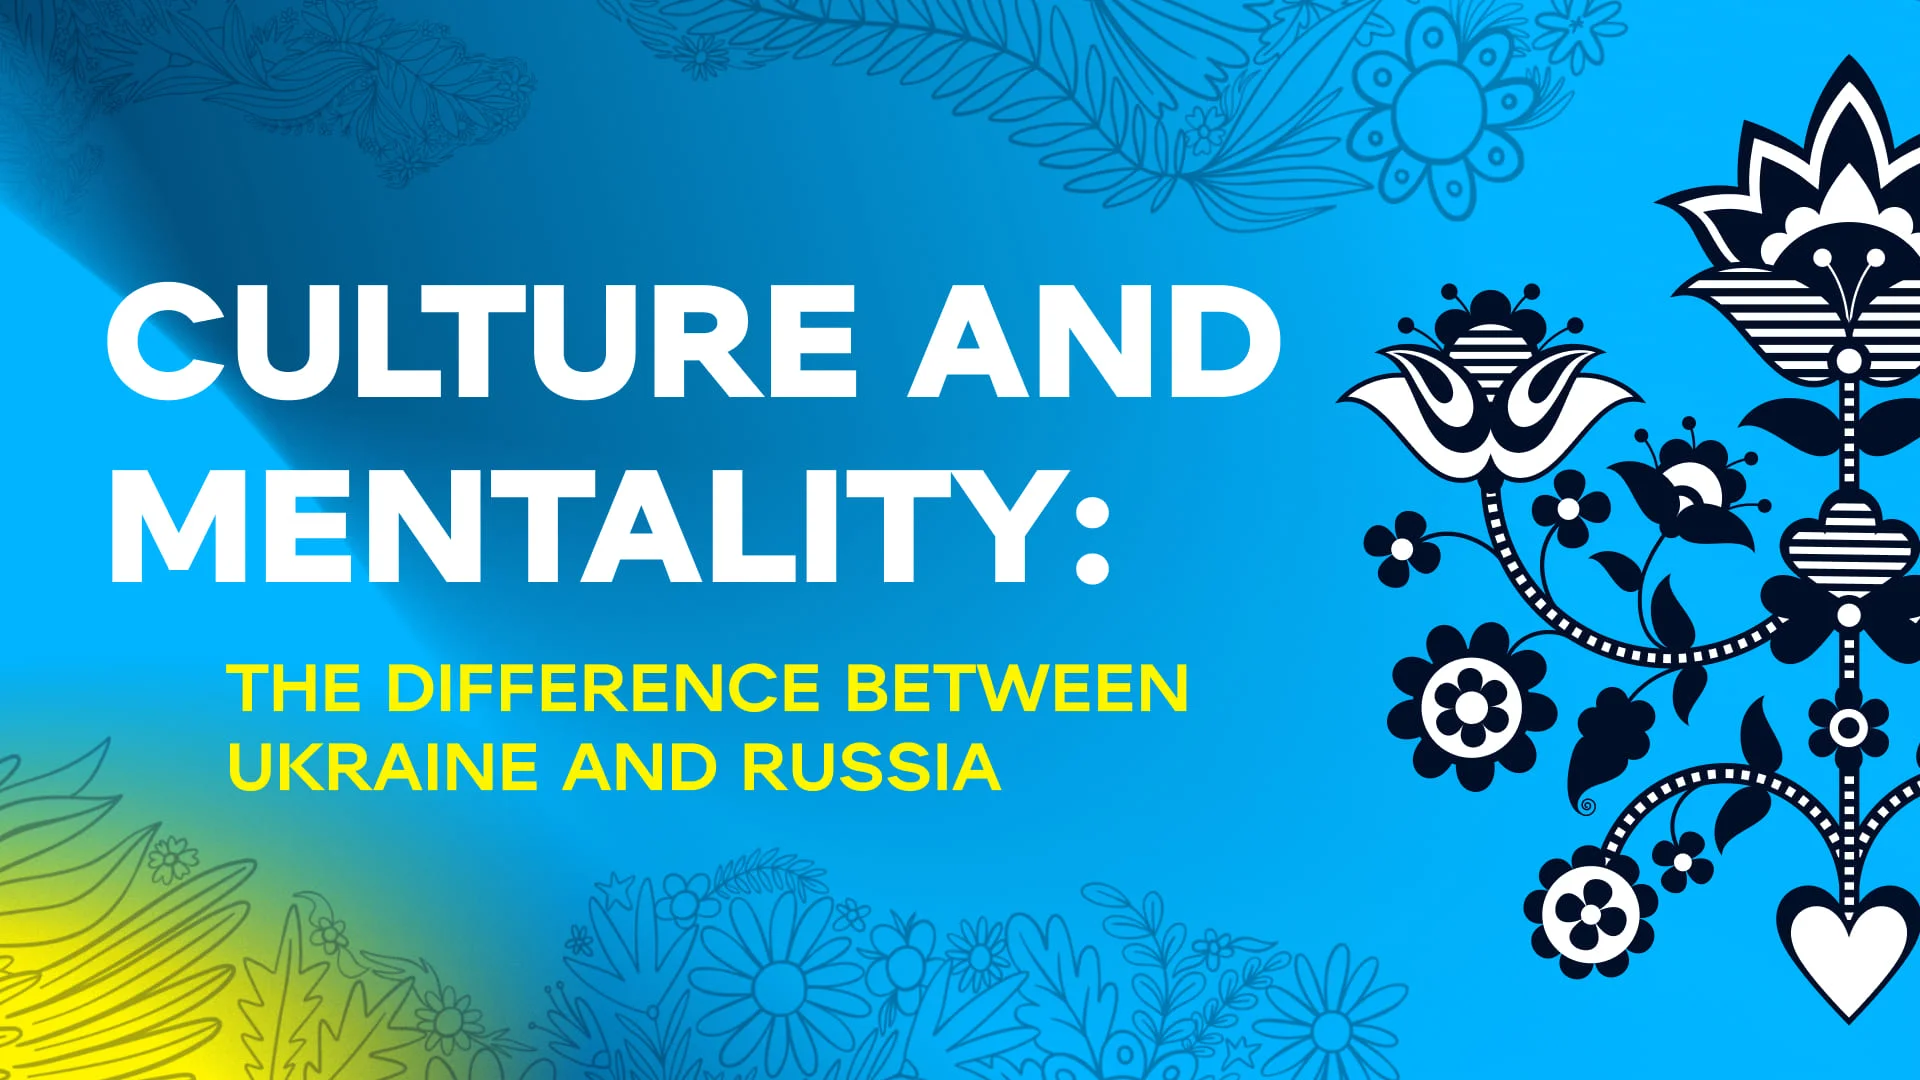 Culture and mentality: the difference between Ukraine and russia. Credit: WePlay Holding